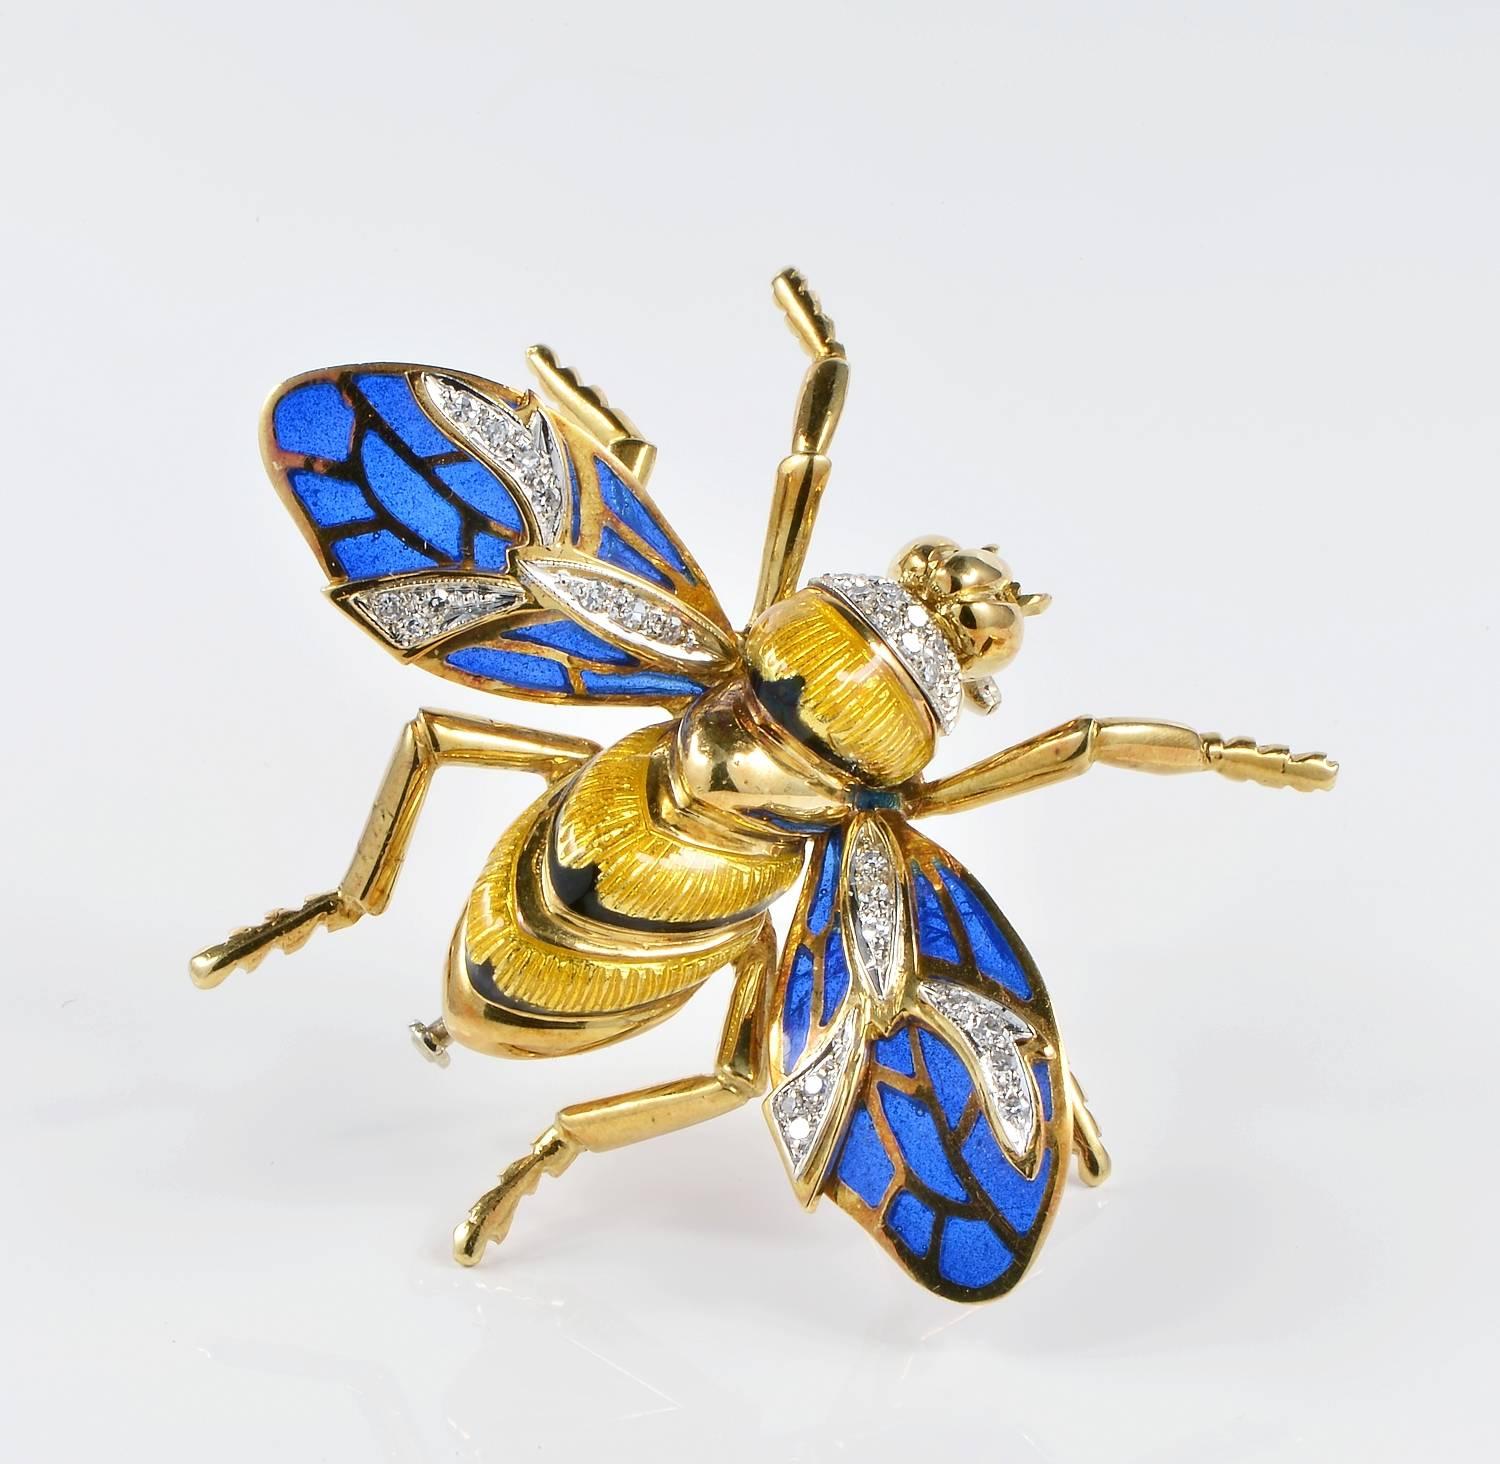 Insect theme have since ever attracted jewellery, here is a terrific example dating 50/60's displaying magnificent art workmanship. An Italian premier example superbly hand crafted of solid 18 KT and Platinum.

Resembling a terrific Bumble Bee of